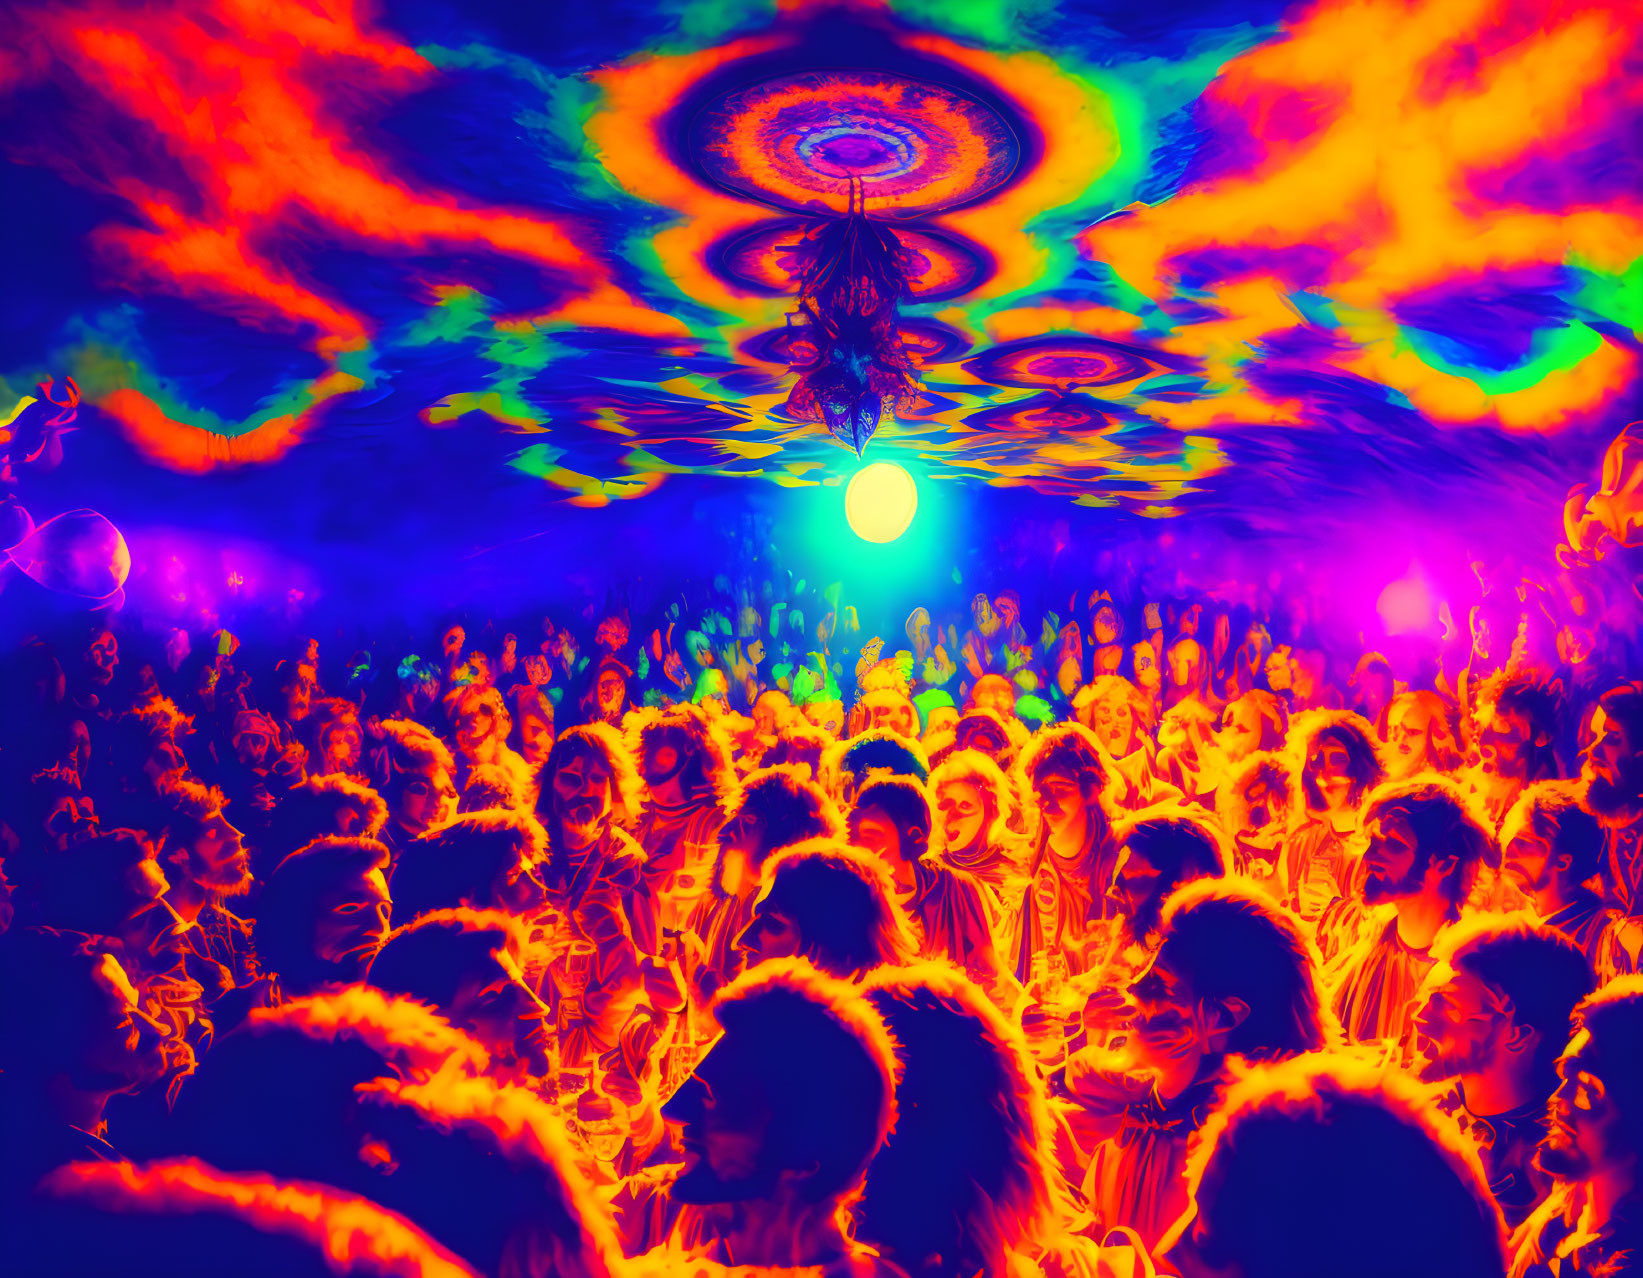 Colorful Psychedelic Crowd with Distorted Effects and Bright Orb